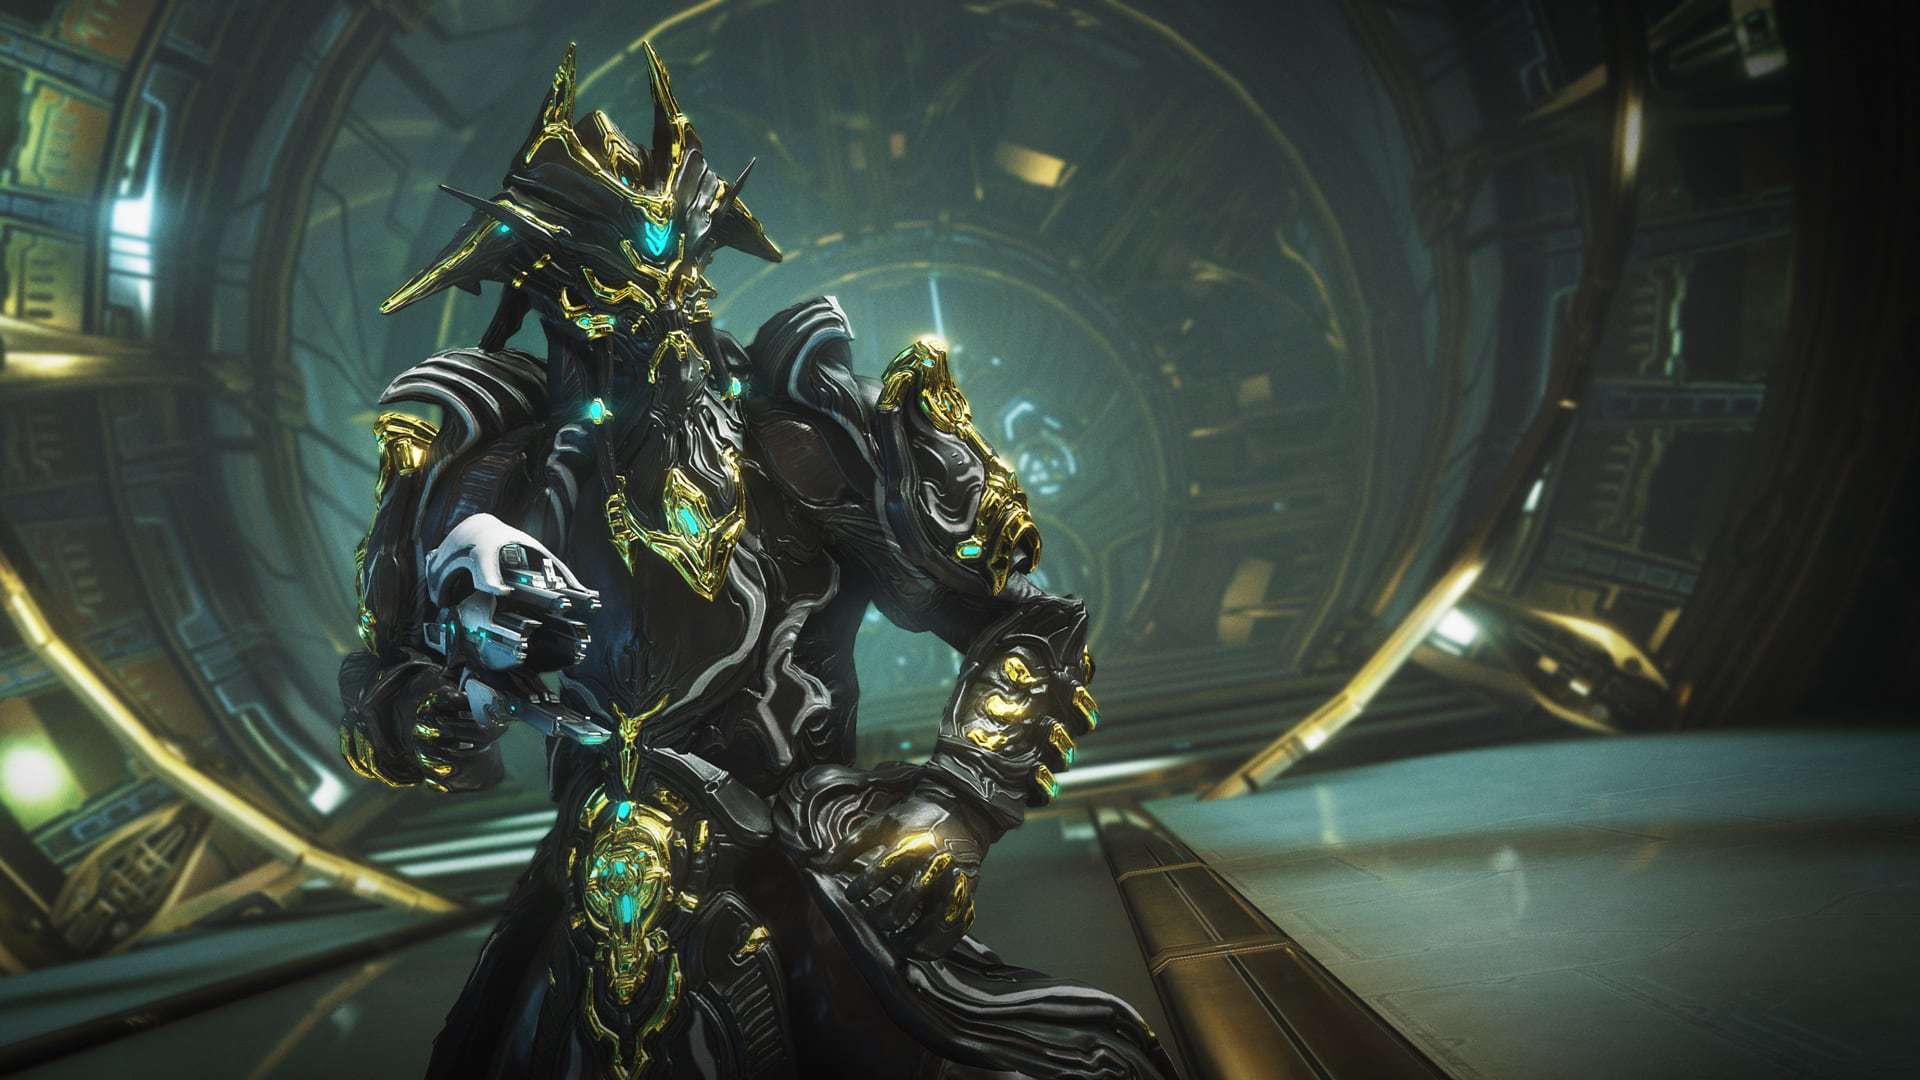 Warframe Gold Armour Wallpapers